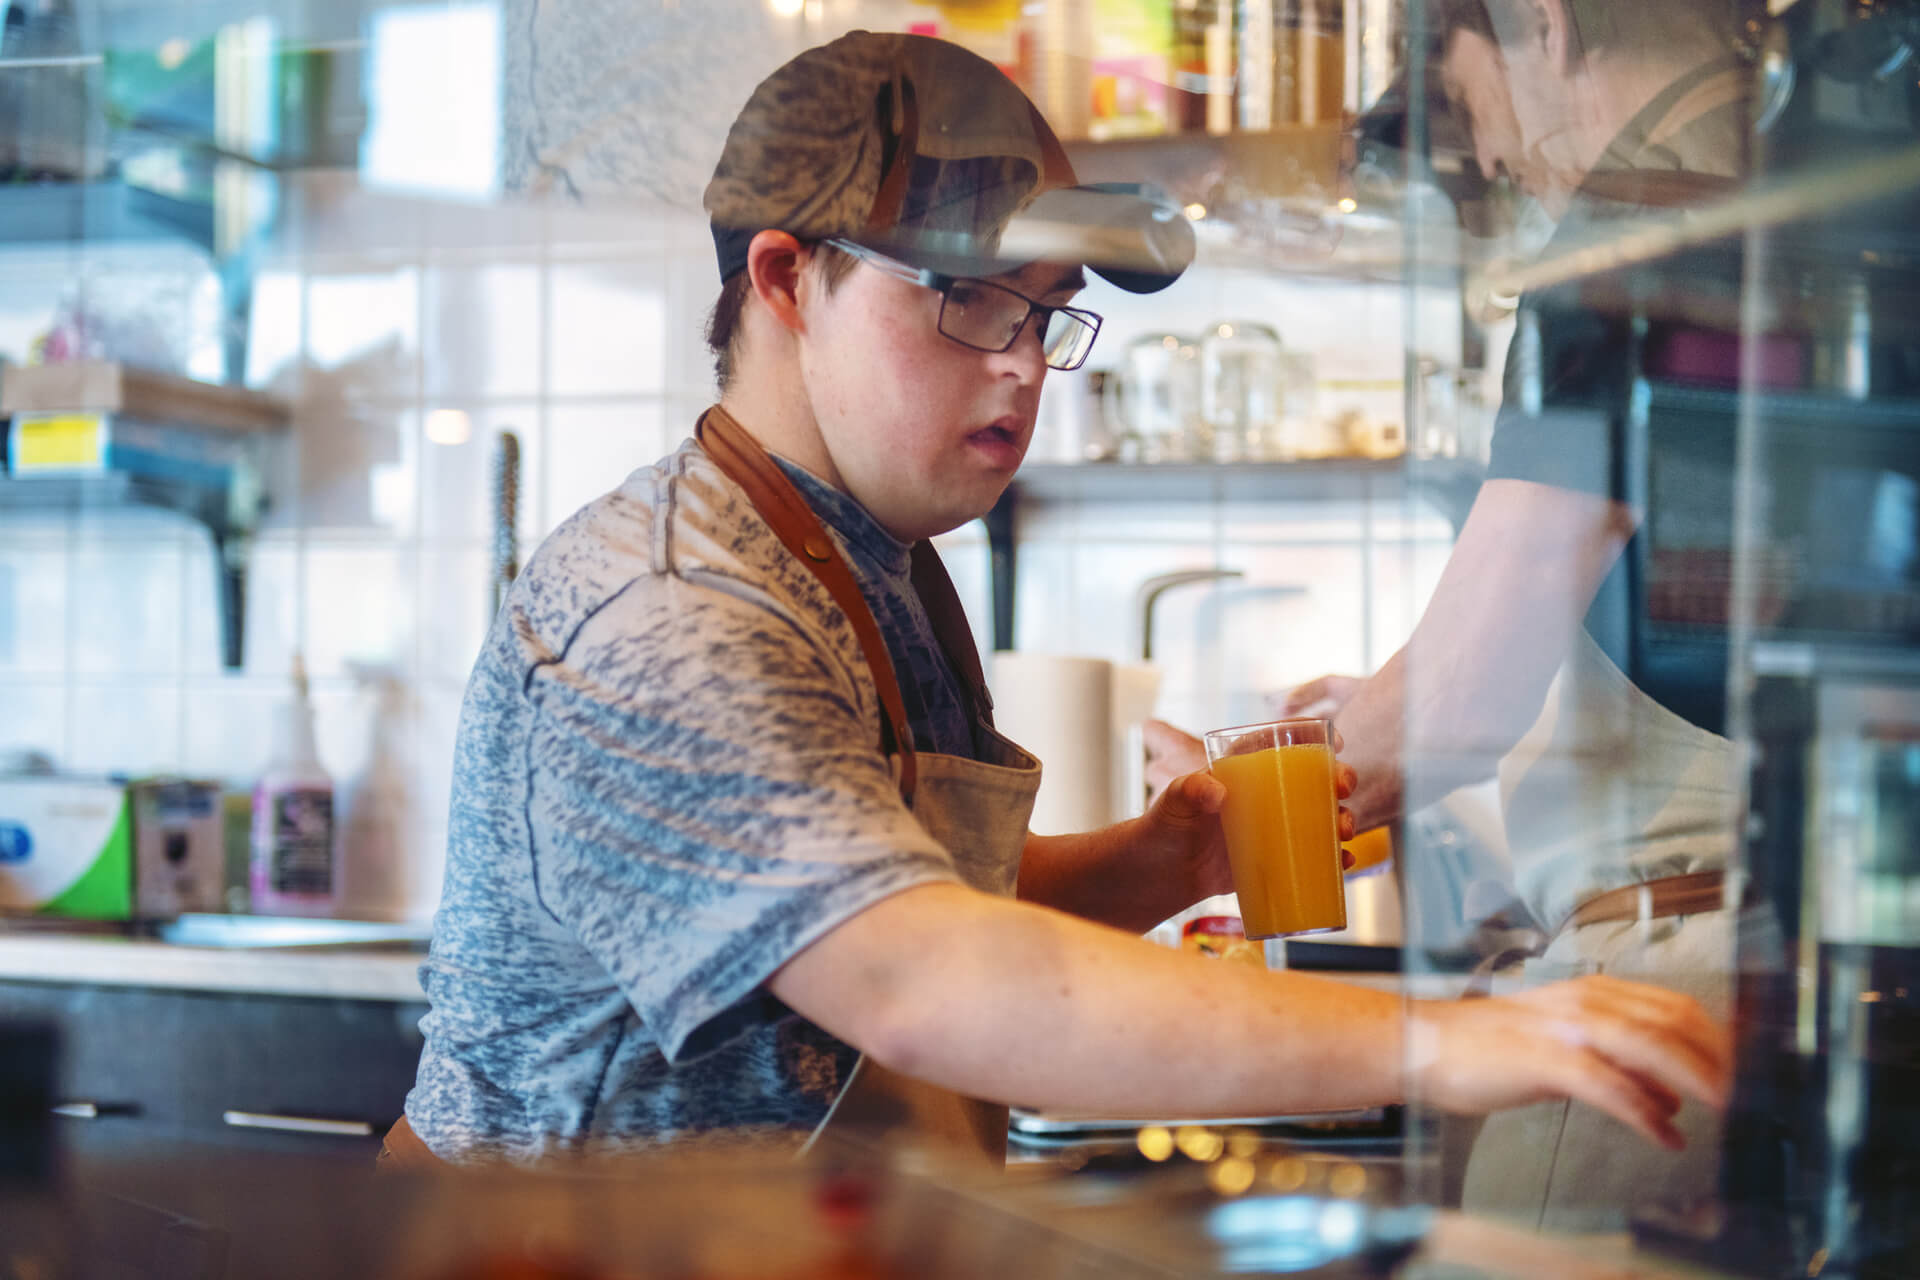 Young male with intellectual disability working in a cafe